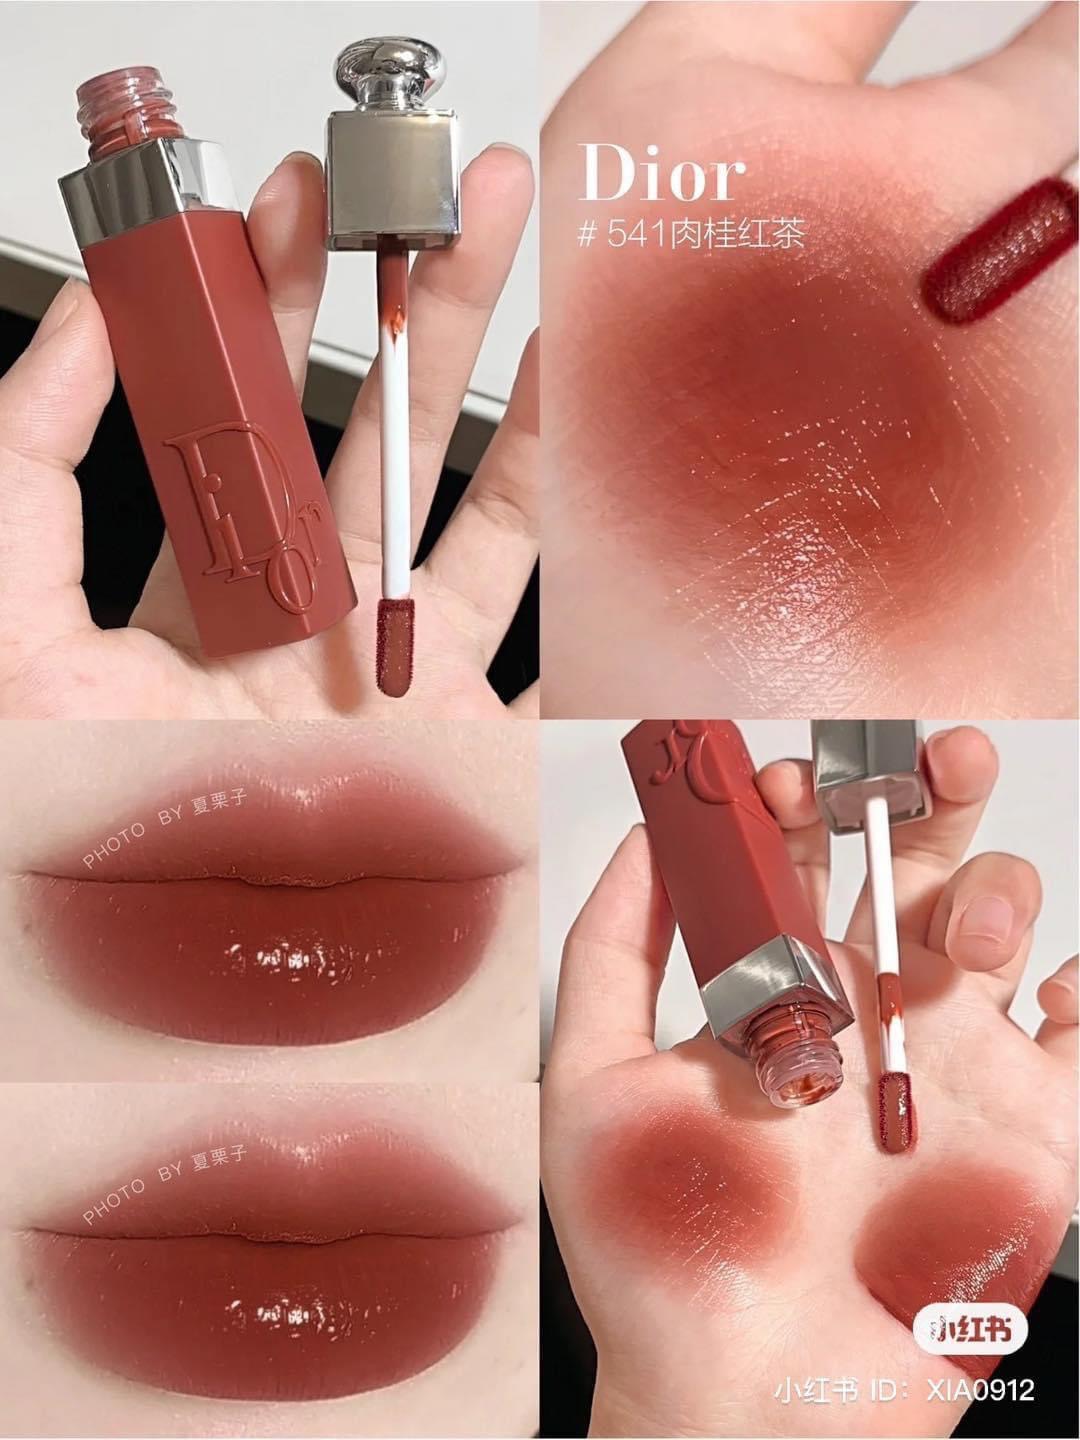 Dior  Summer 2022 Dior Addict Lip Tint Review and Swatches  The Happy  Sloths Beauty Makeup and Skincare Blog with Reviews and Swatches